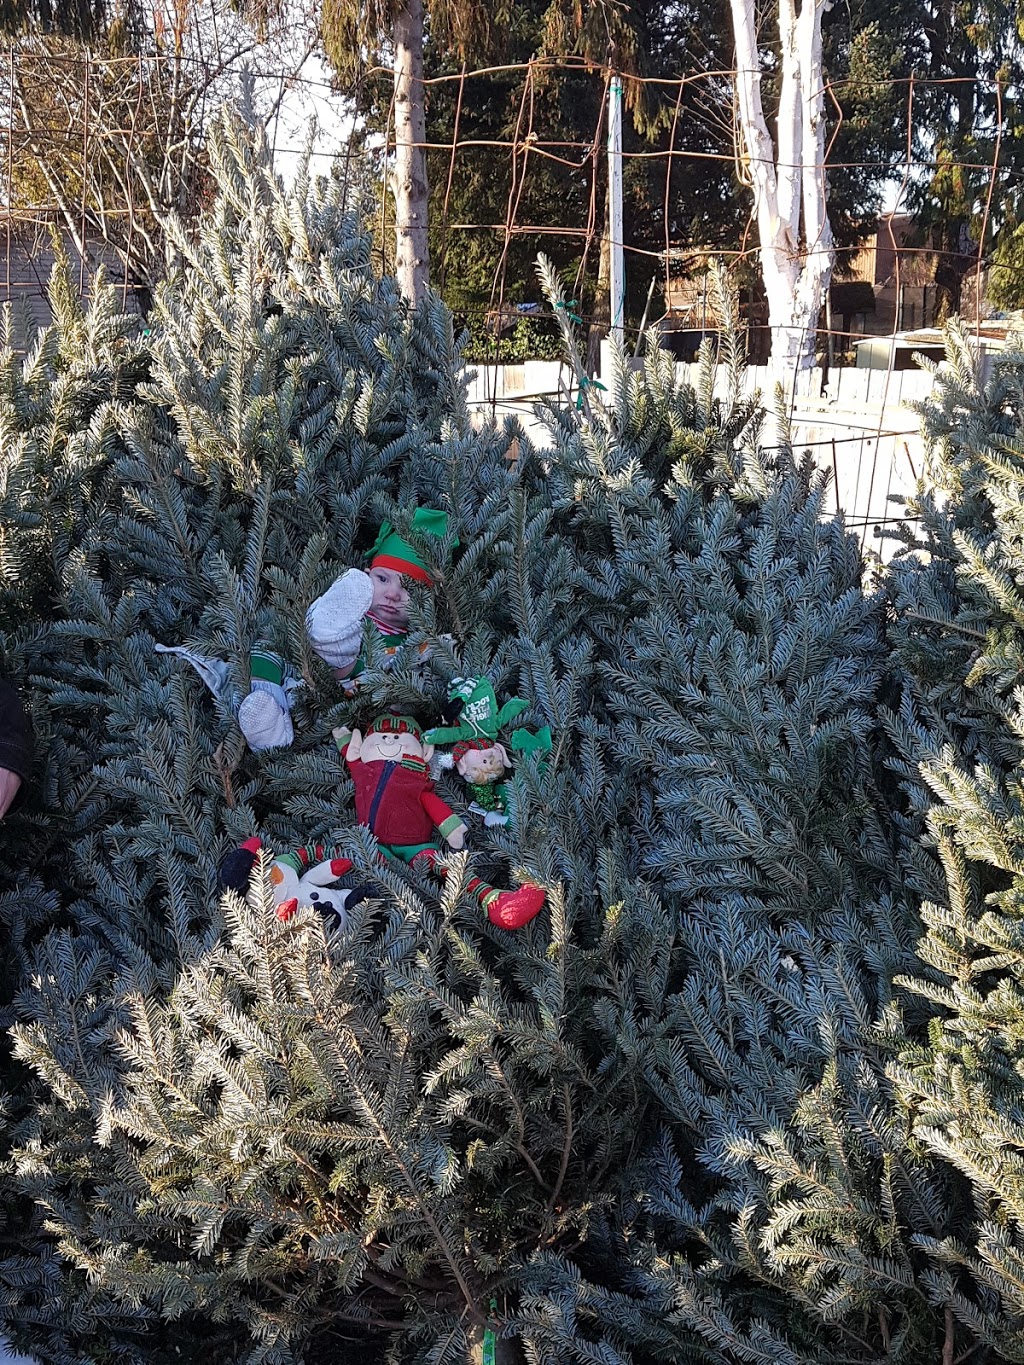 Chungs Christmas Tree Lot | shopping mall | 5749 Ladner Trunk Rd, Delta, BC V4K 1X5, Canada | 6047807840 OR +1 604-780-7840